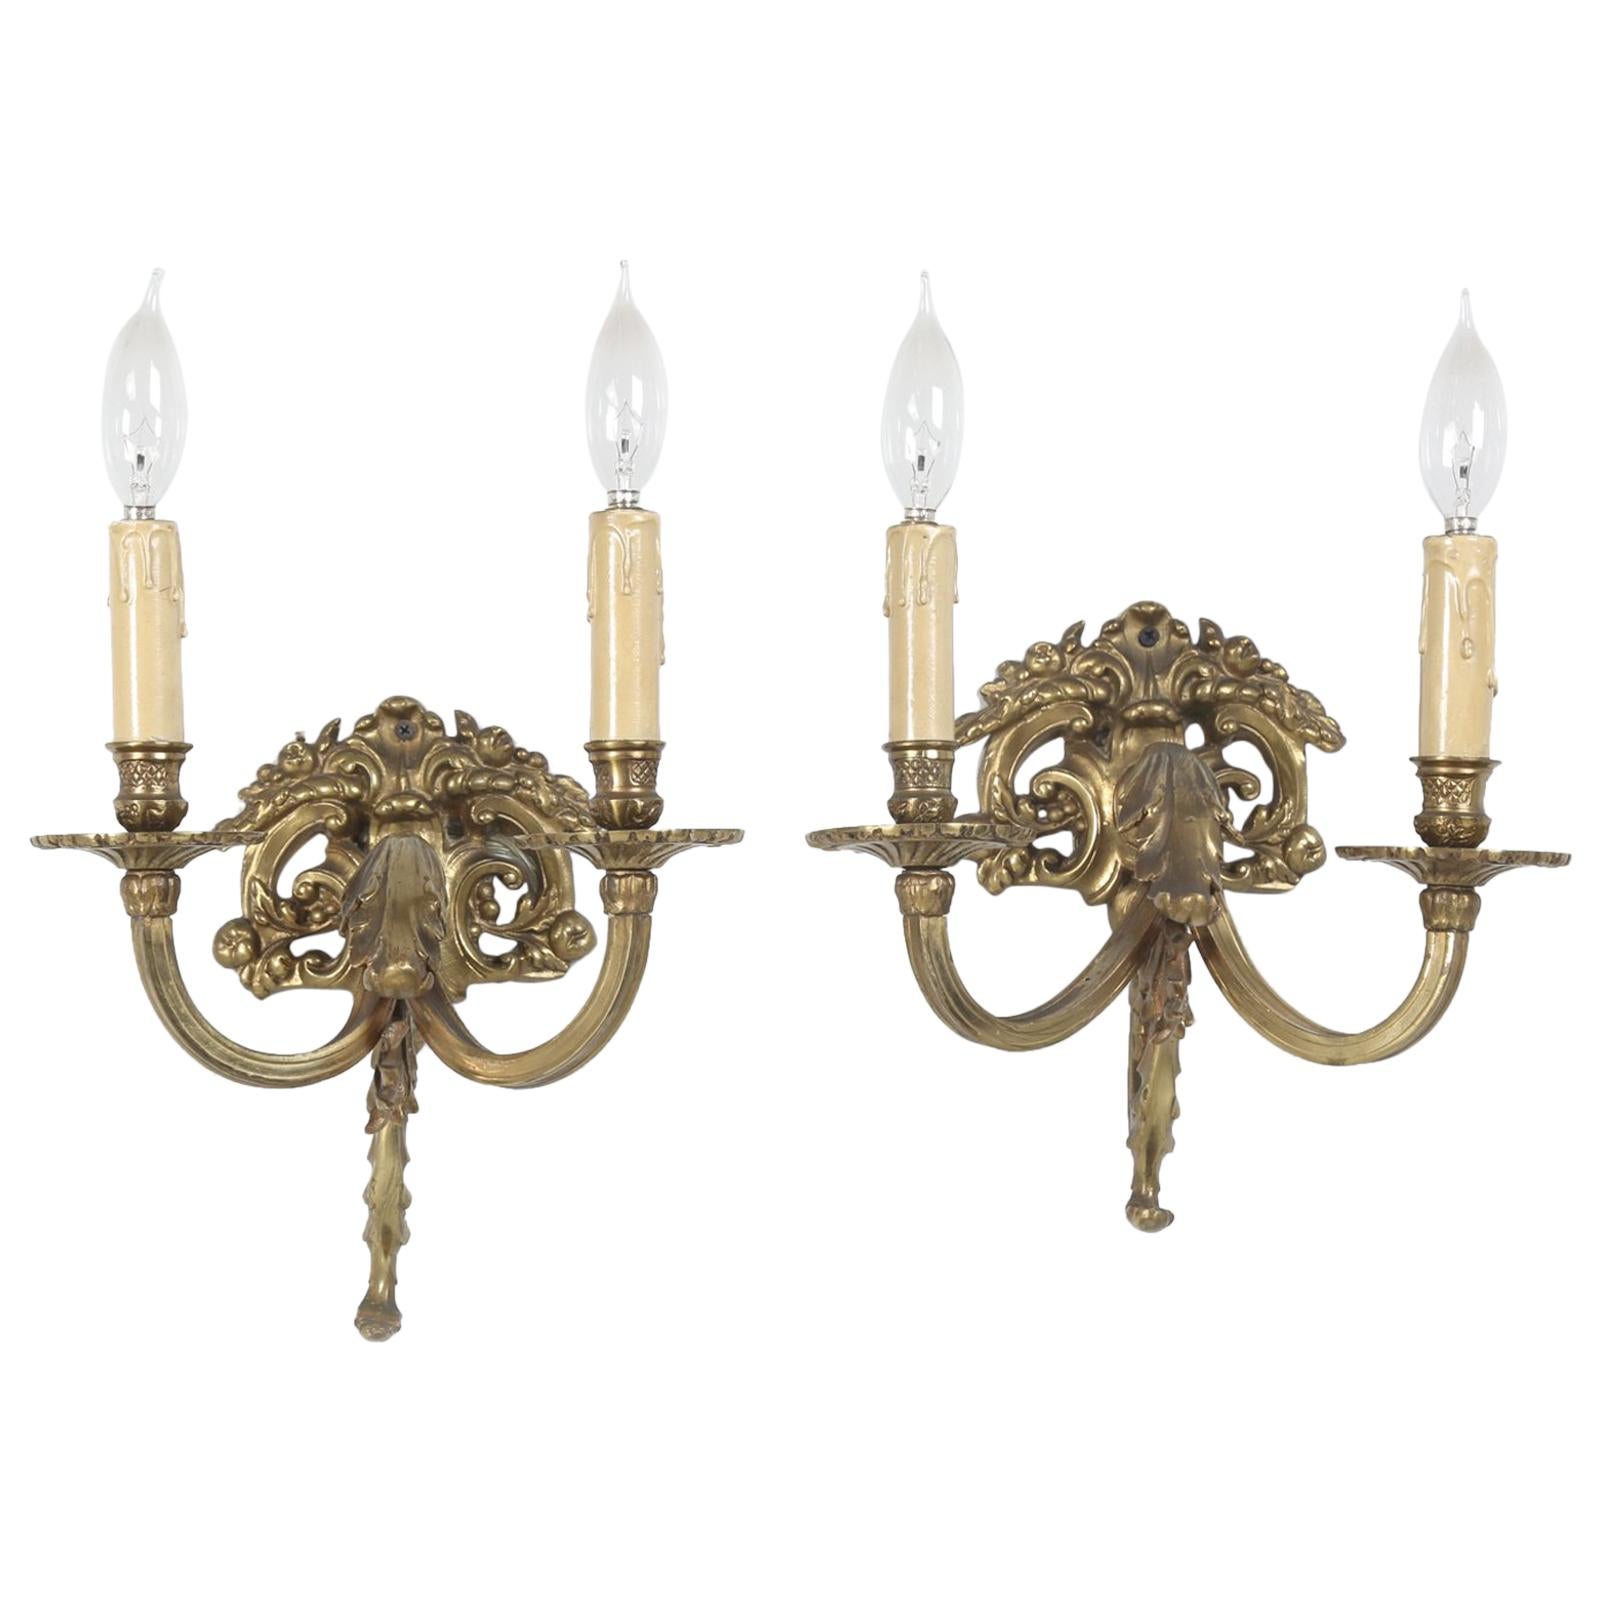 Pair of Solid Brass Two-Light Sconces